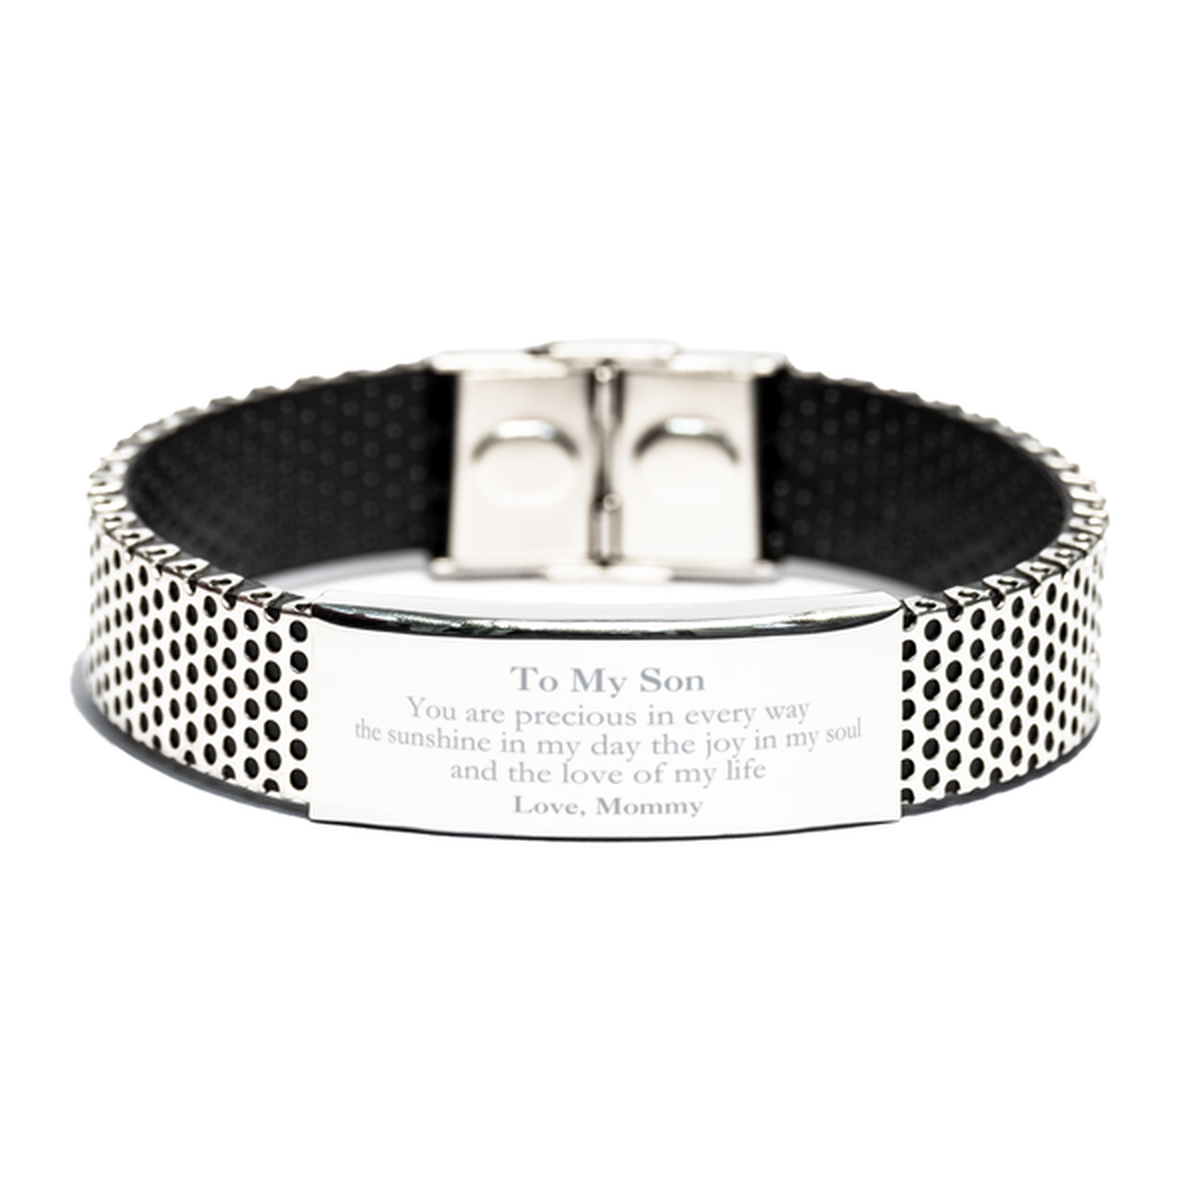 Graduation Gifts for Son Stainless Steel Bracelet Present from Mommy, Christmas Son Birthday Gifts Son You are precious in every way the sunshine in my day. Love, Mommy